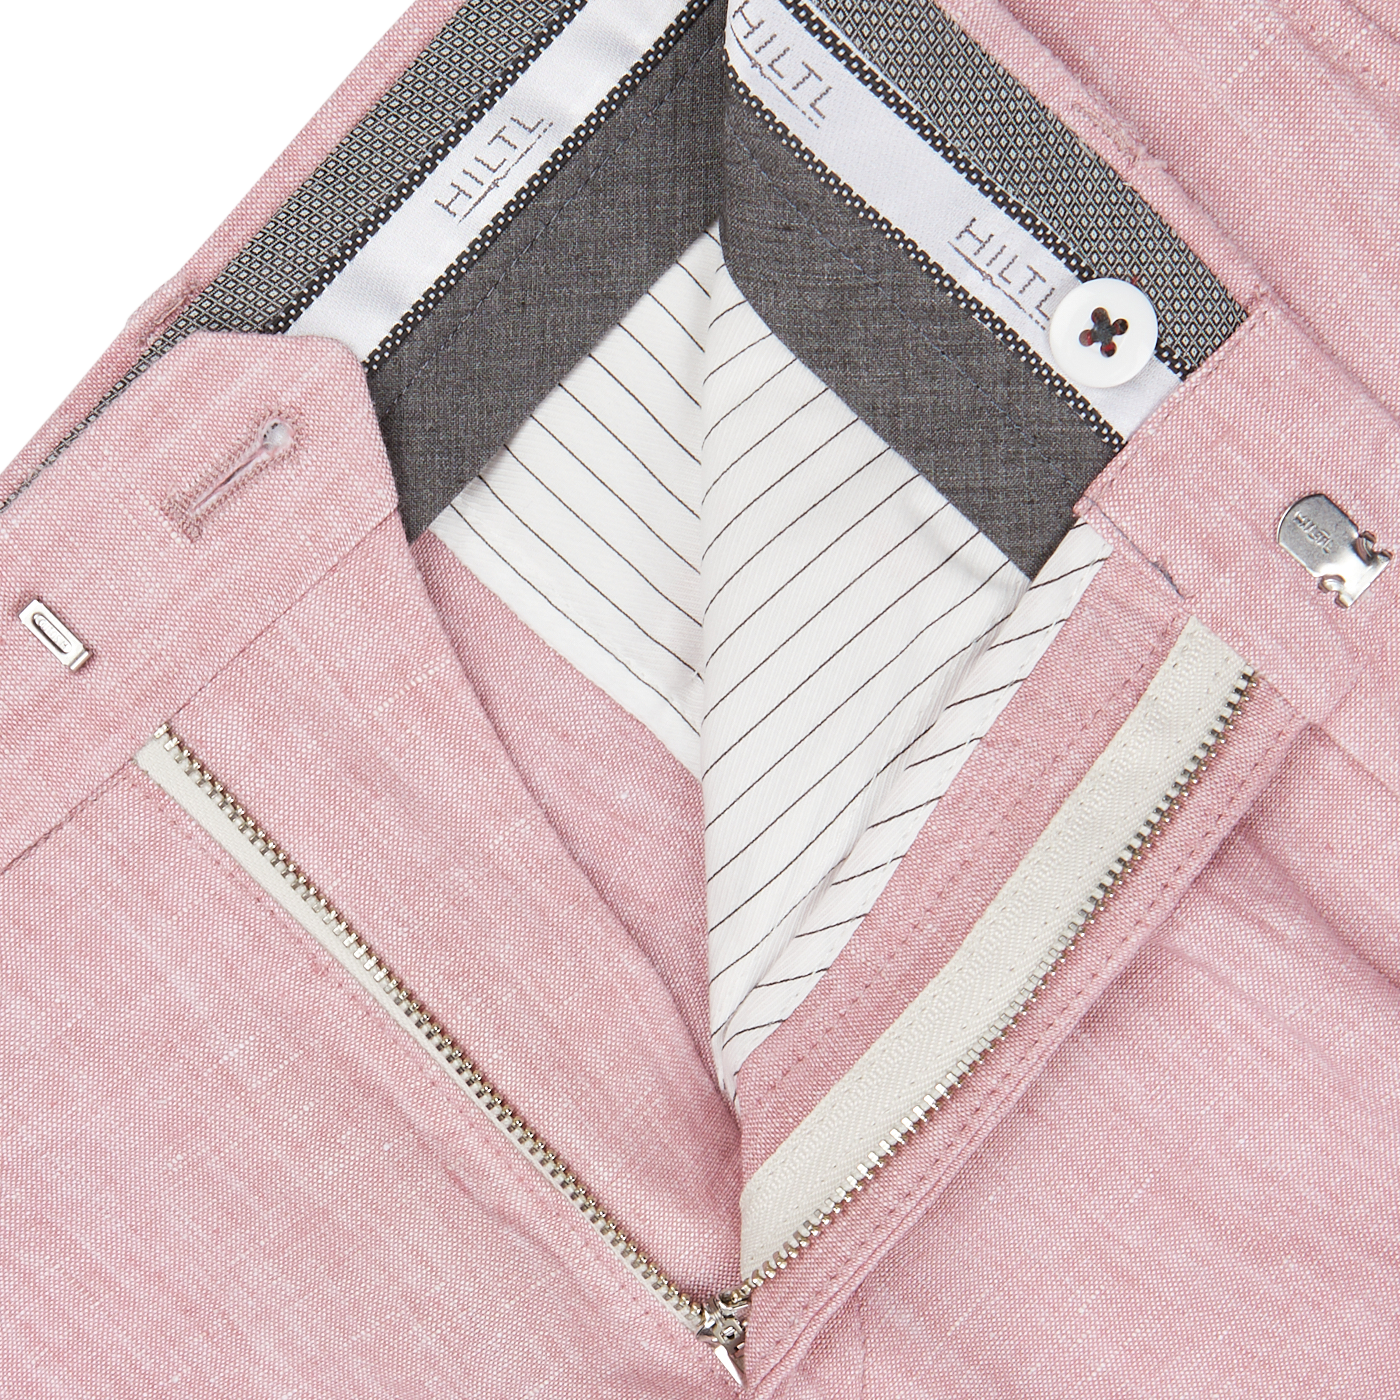 Close-up of a Light Pink Washed Linen Regular Fit Chinos from Hiltl with a zipper, featuring striped lining and designer labels.